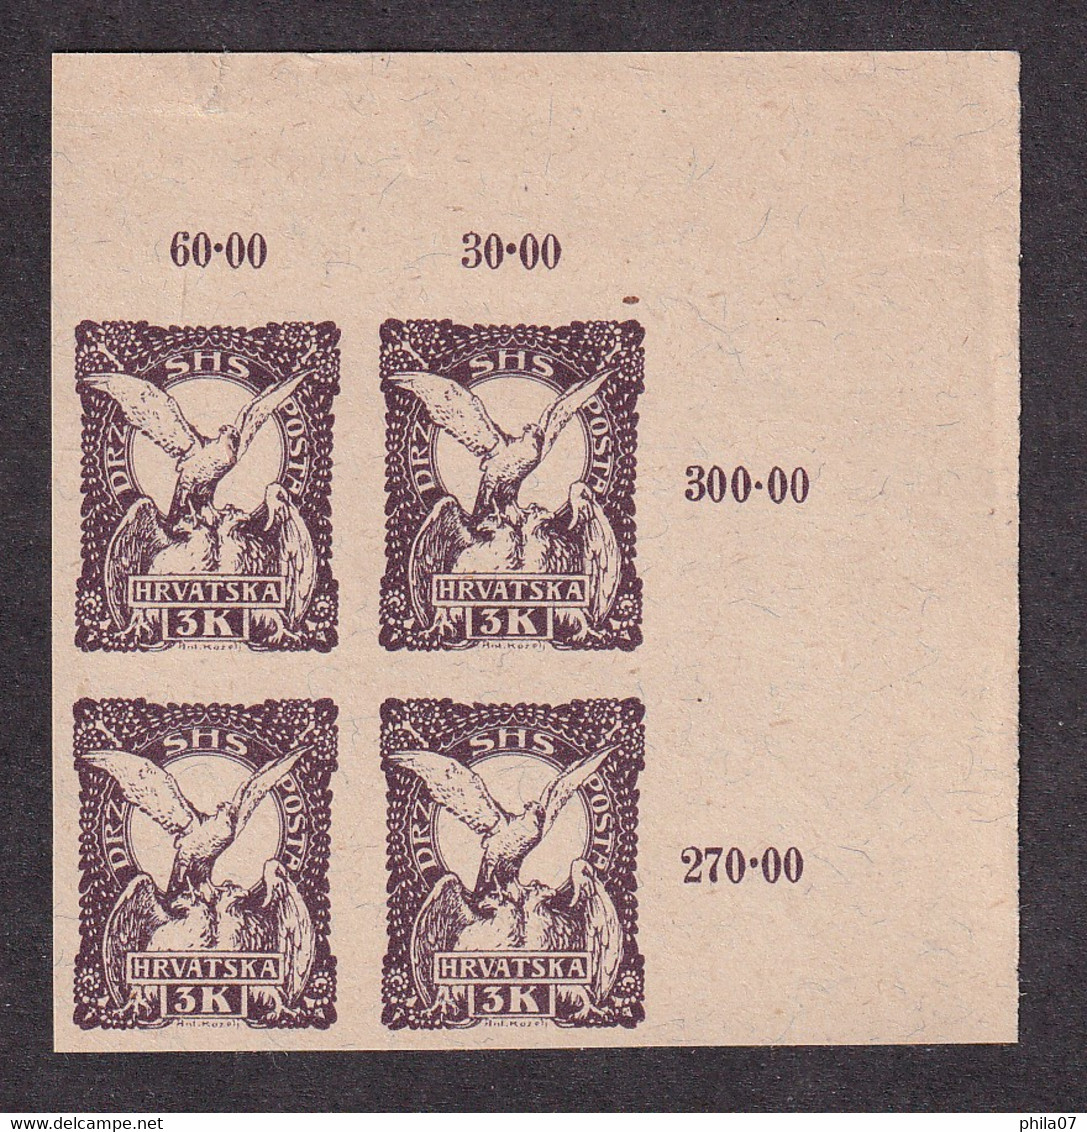 STATE OF SLOVENES, CROATS AND SERBS PS.No. 46 - Short Opinion Pervan - Imperforate Trial Print Of Stamp Of ... / 3 Scans - Unused Stamps